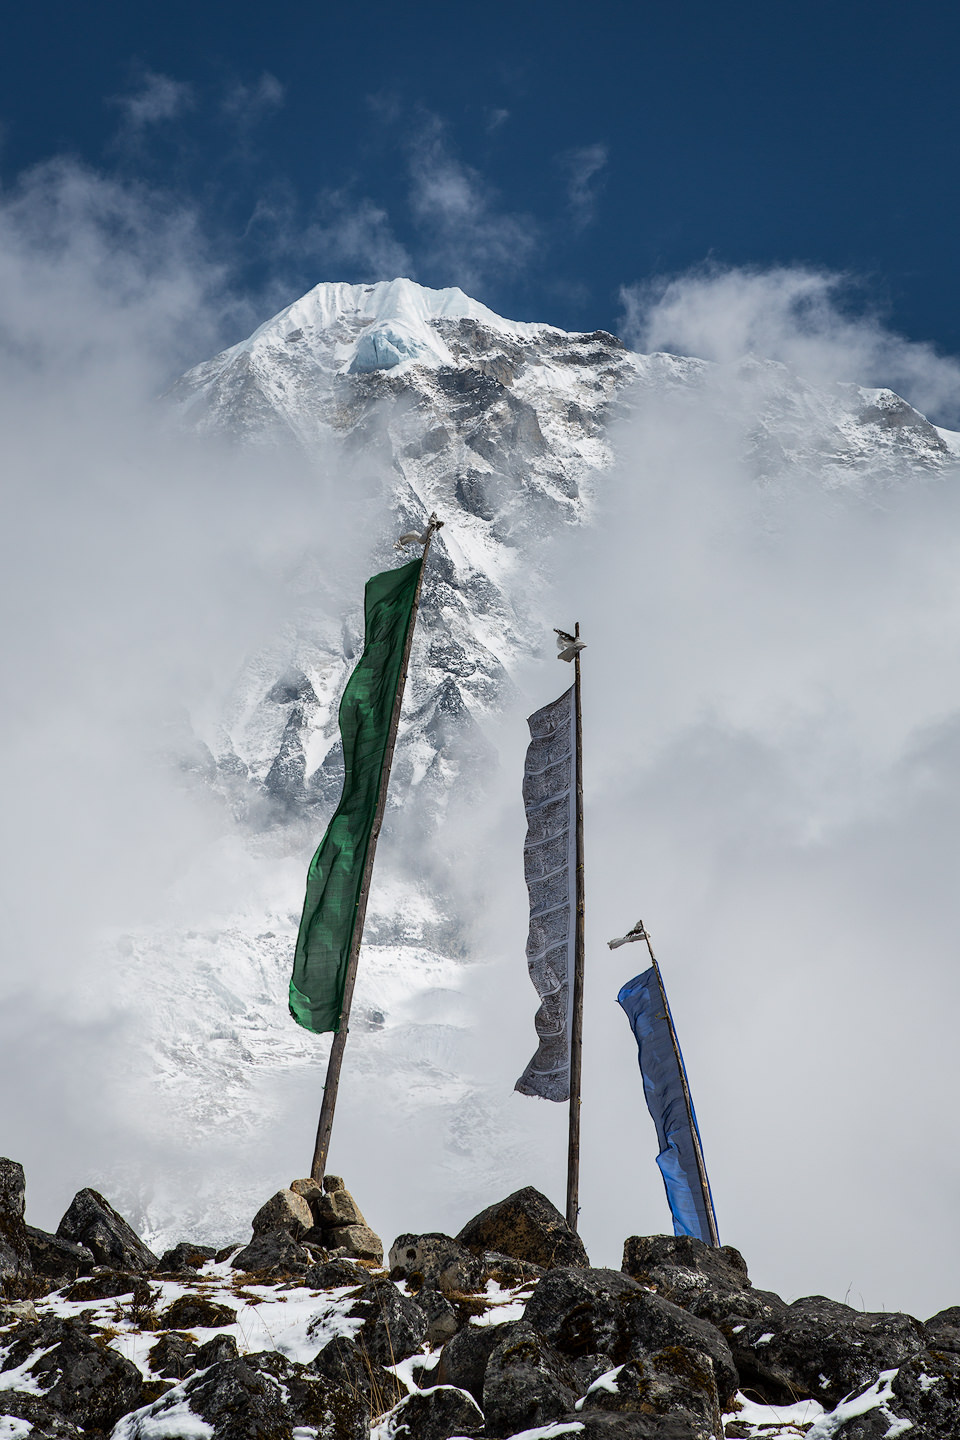 Prayer flags in the wind in front of himalayan peaks.